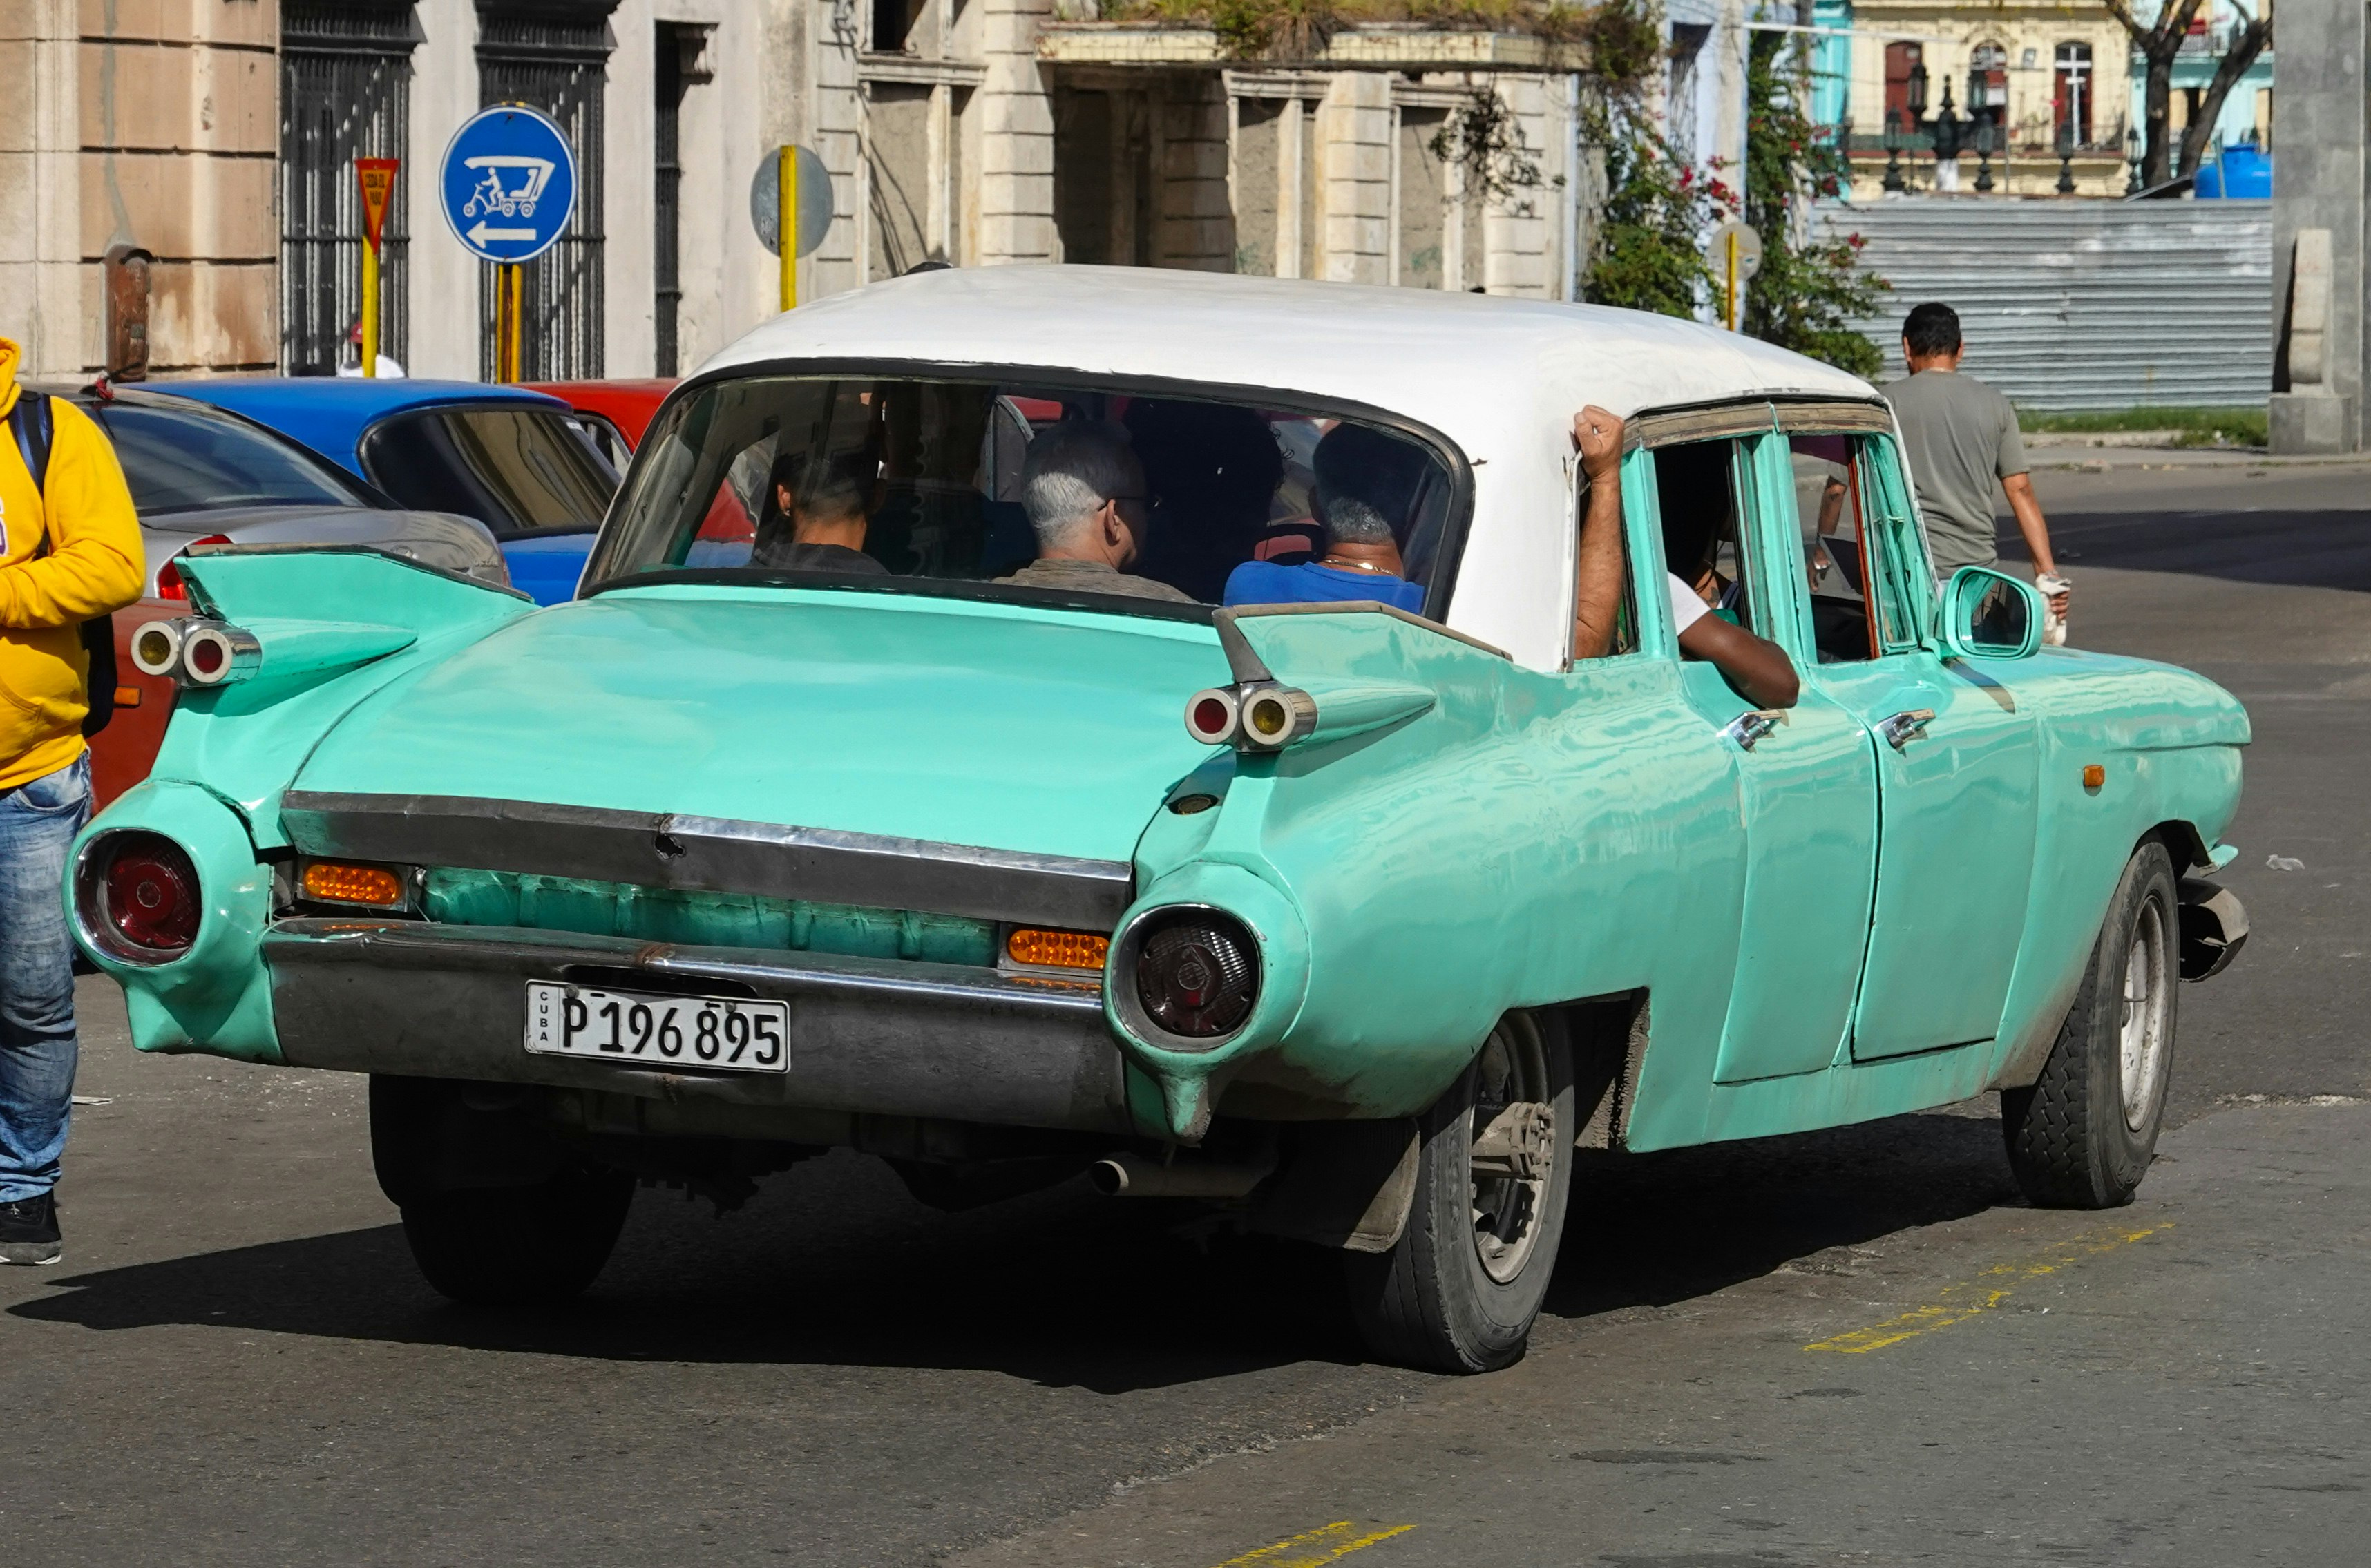 teal and white vintage car on road during daytime